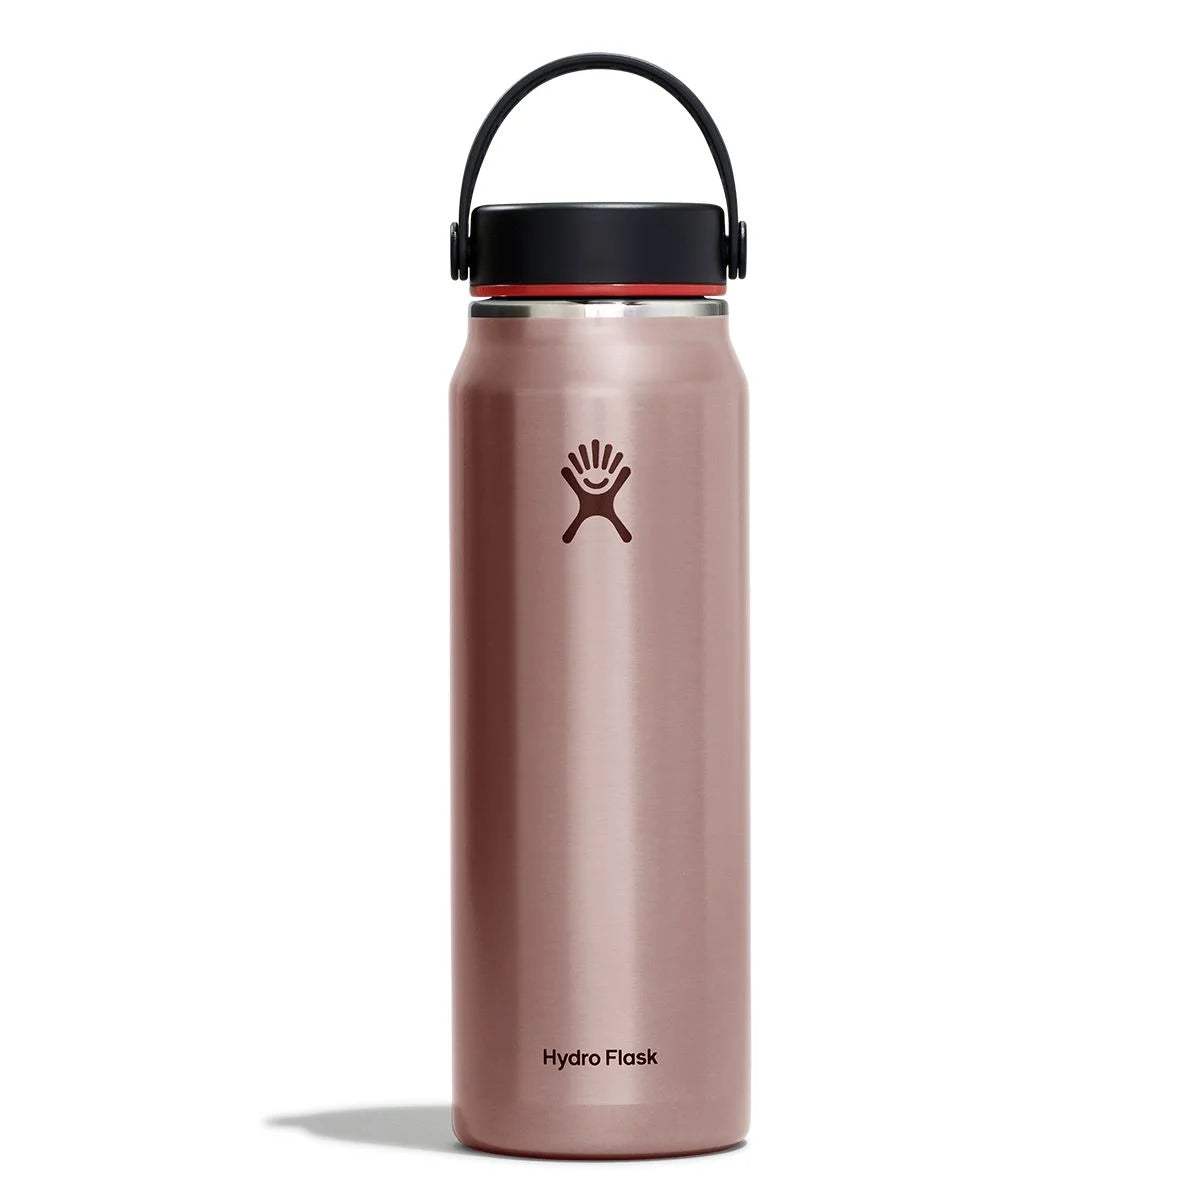 Hydro Flask Promotional Gifts